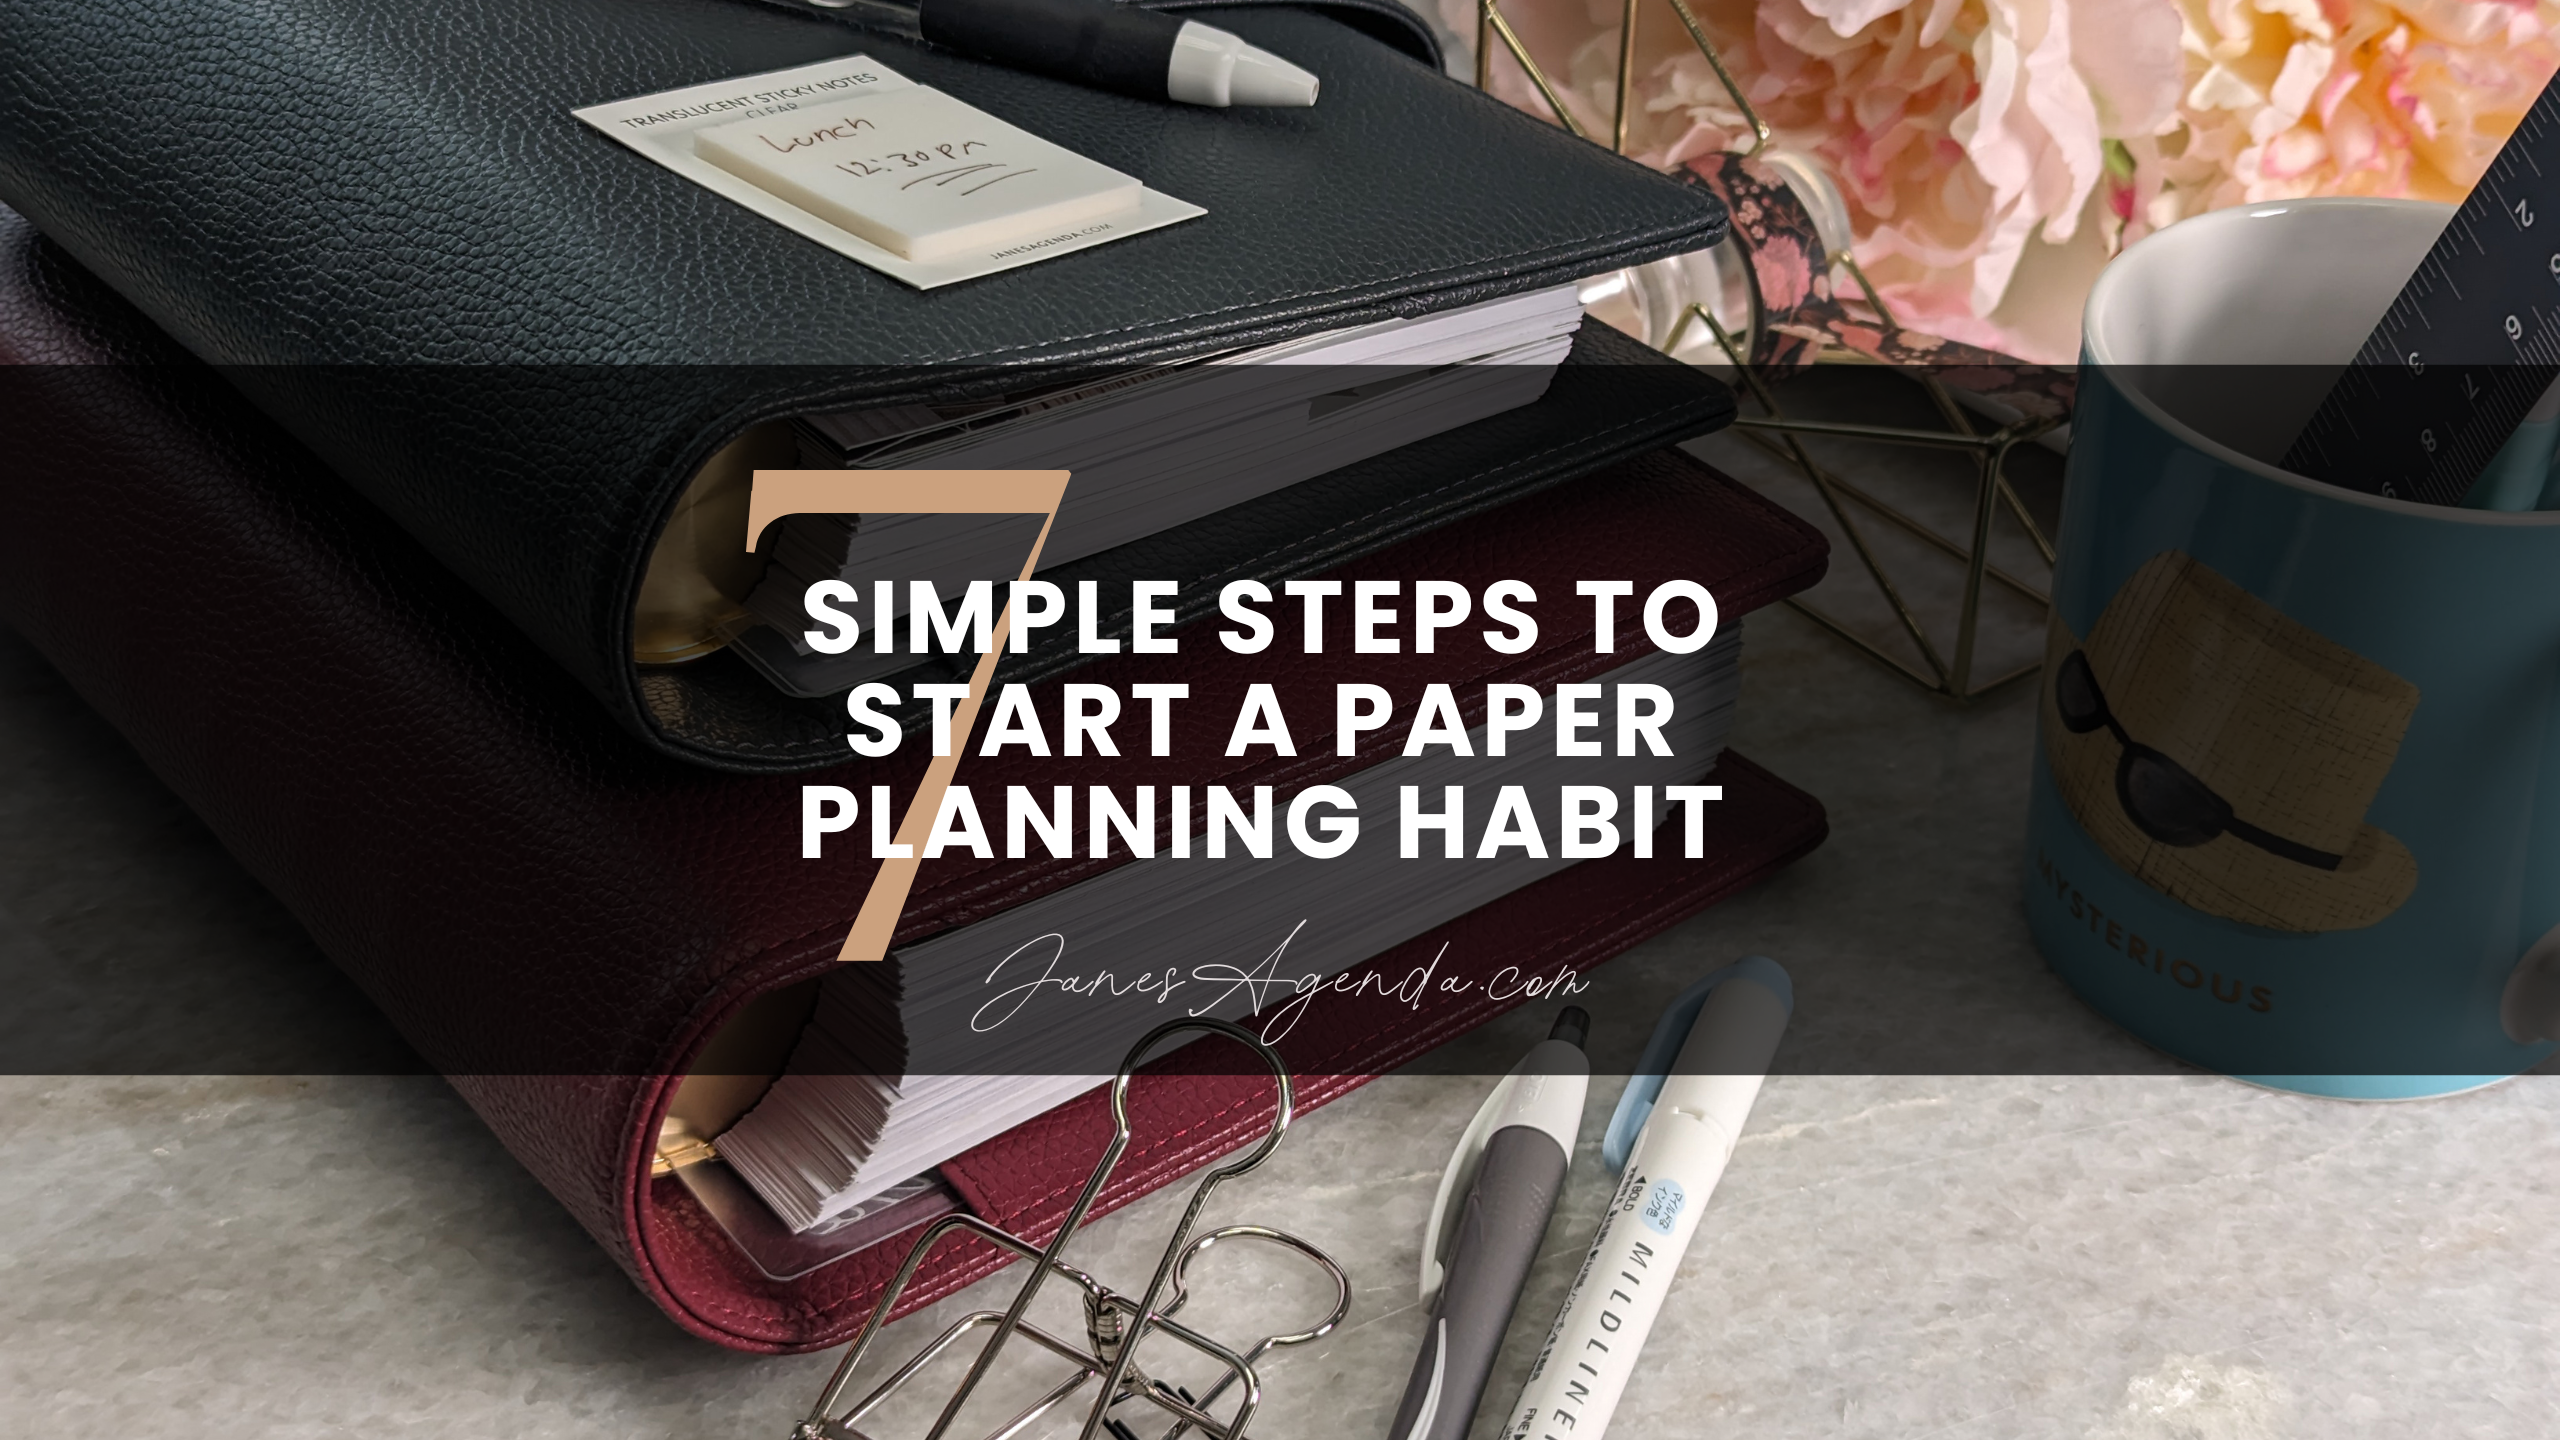 7 Simple Steps to Start a Paper Planning Habit